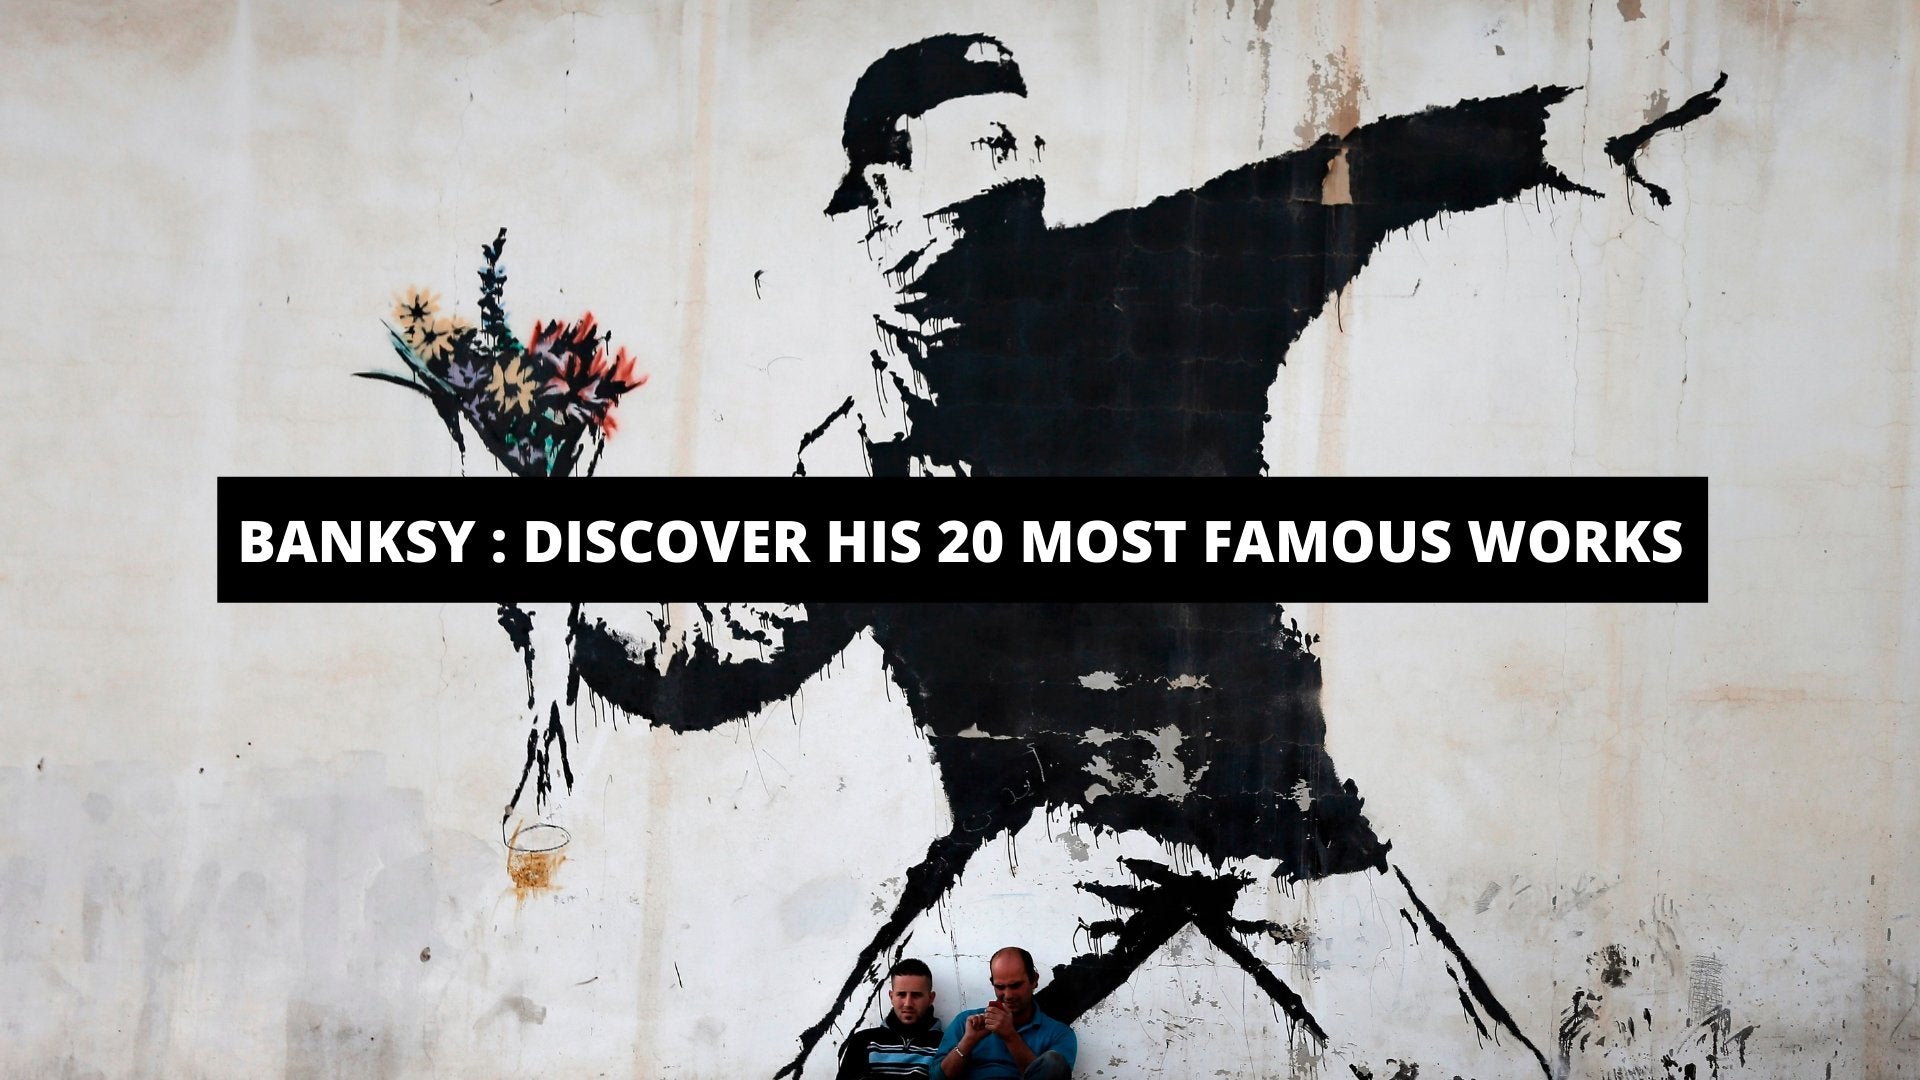 Banksy : Discover his 20 most famous artworks - The Trendy Art